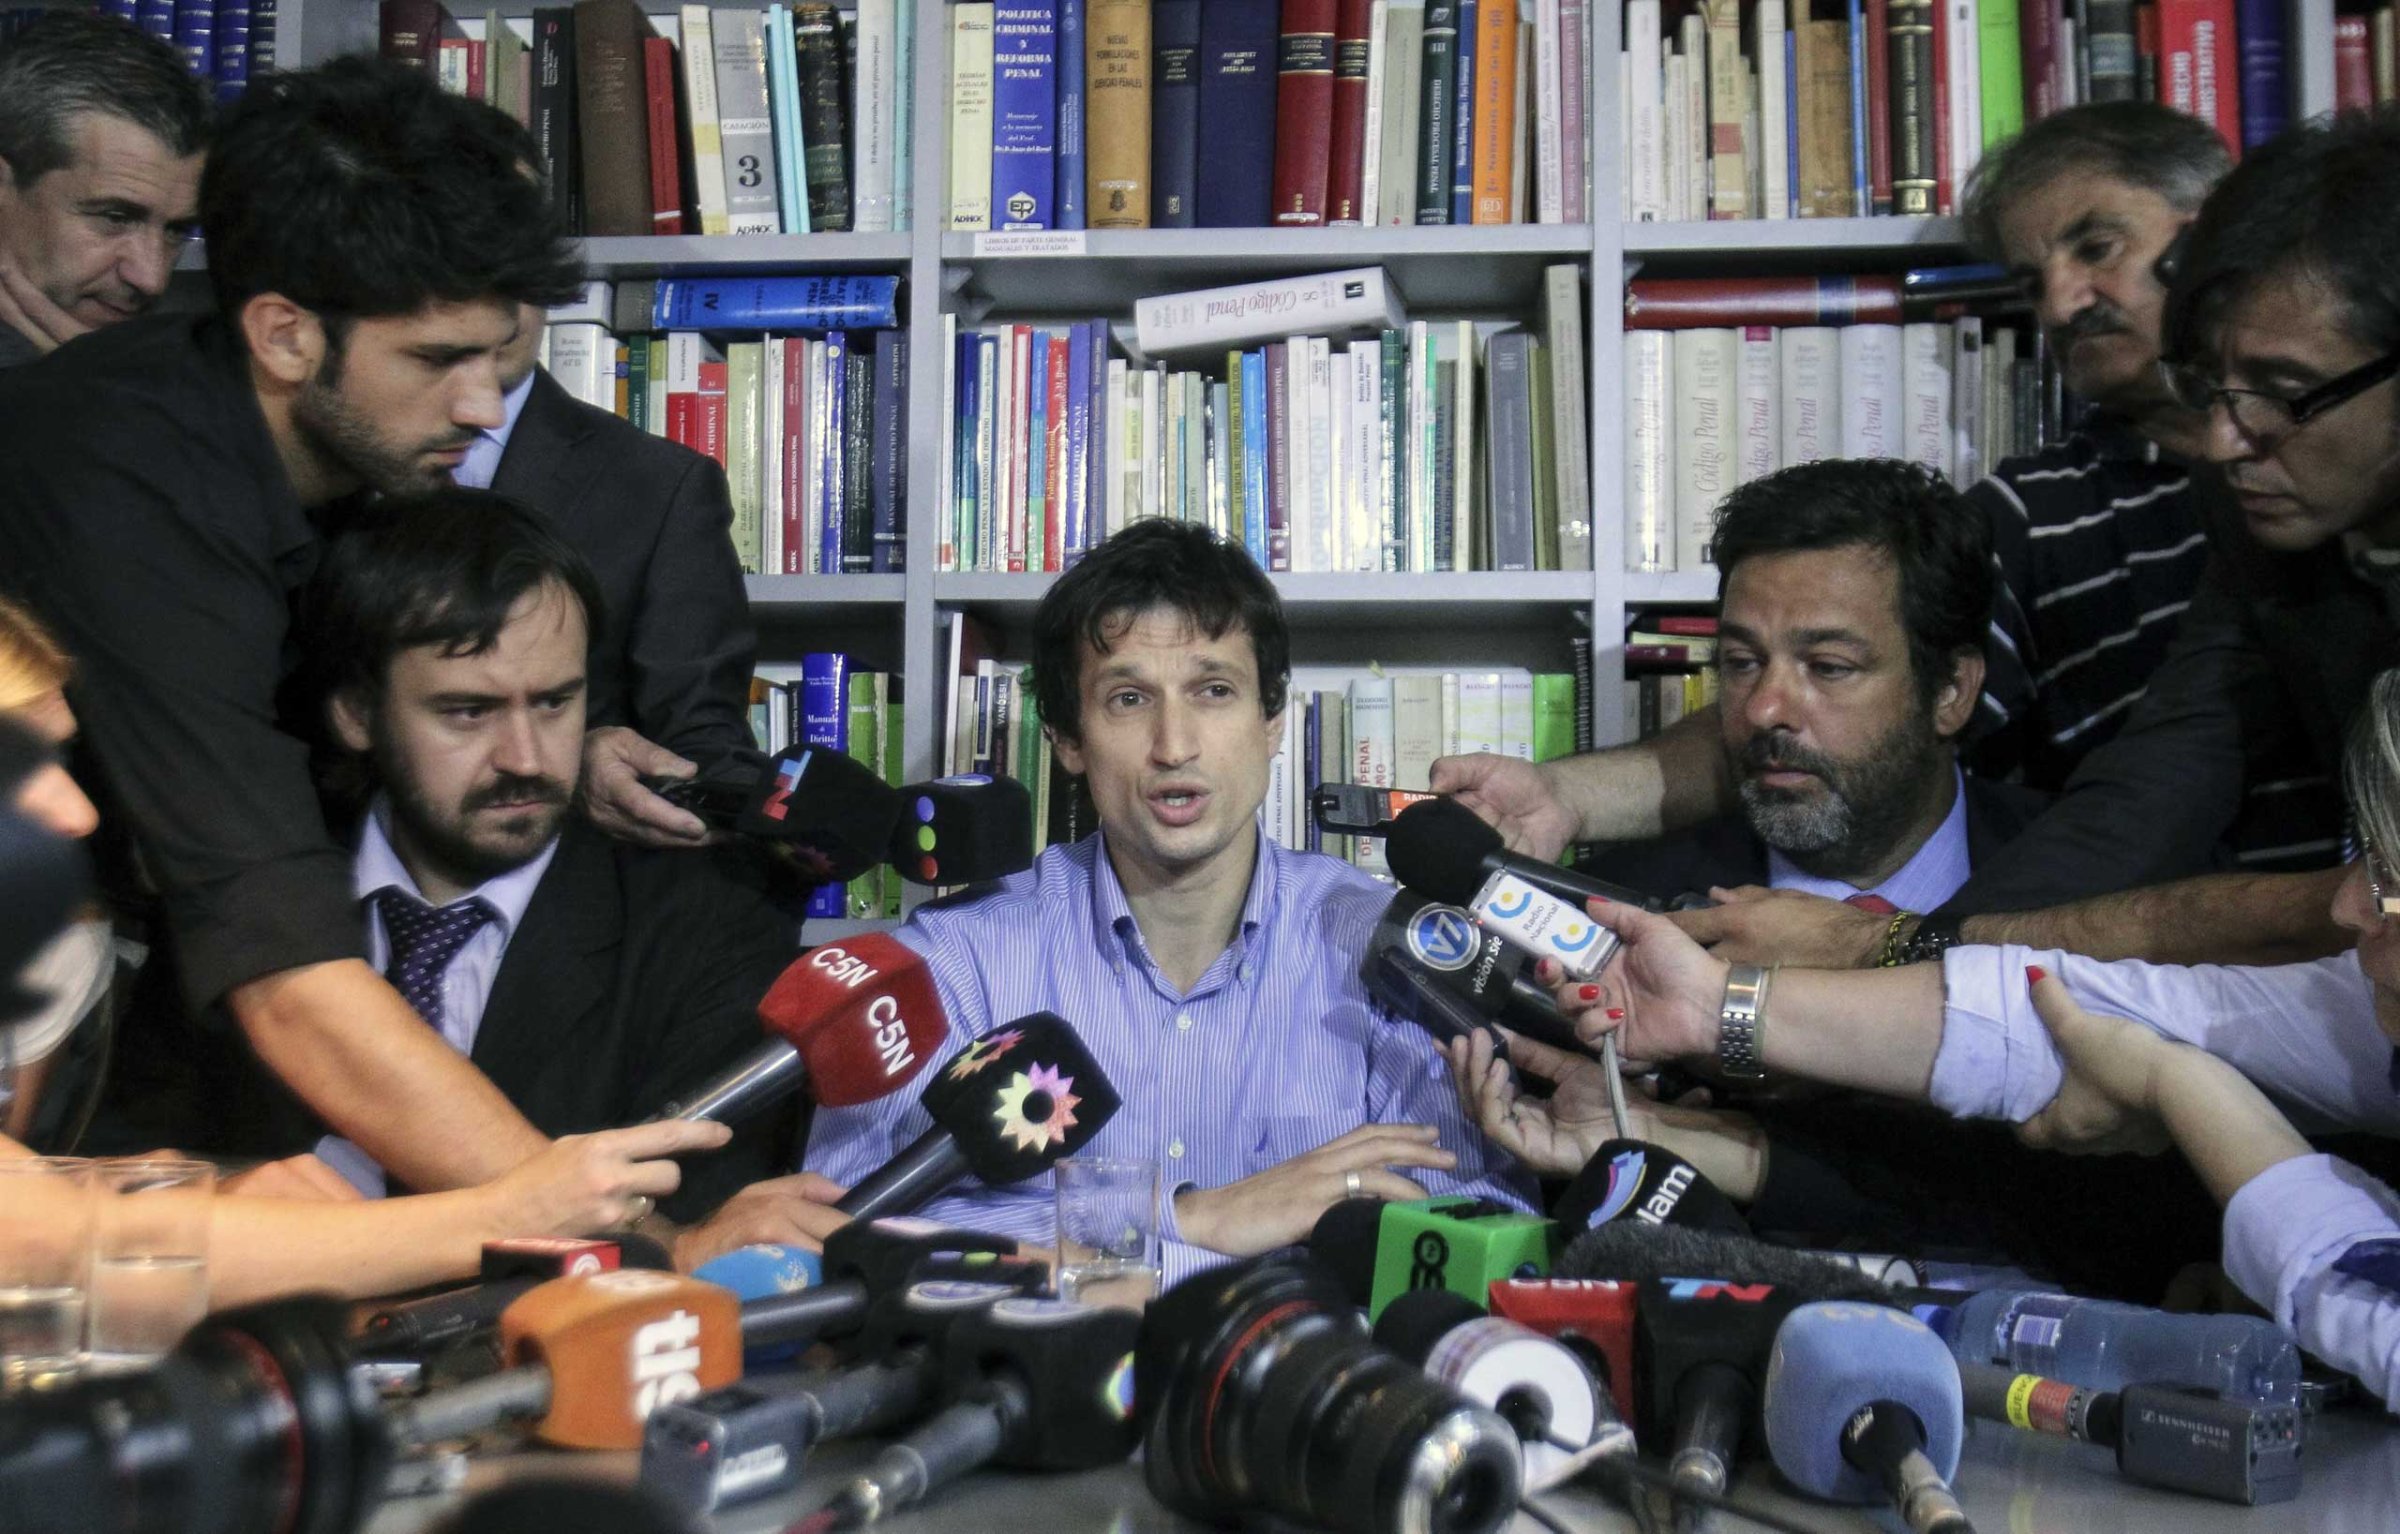 Diego Lagomarsino , assistant of late prosecutor Alberto Nisman speaks during a press conference in Buenos Aires, Jan. 28, 2015.